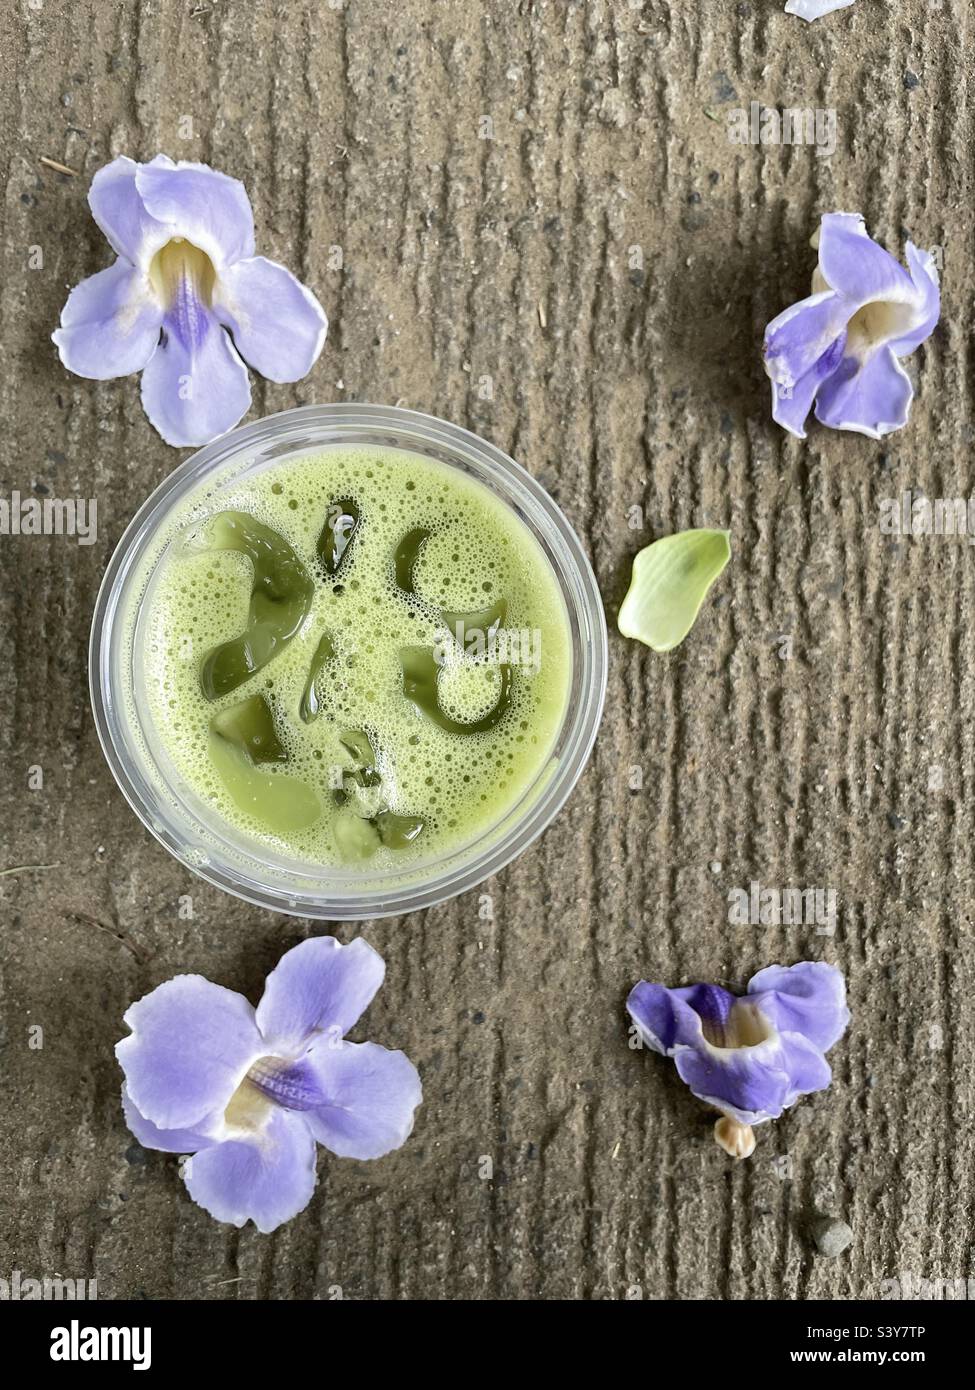 Top shot of green tea matcha latte surrounded by purple flowers on grunge background Stock Photo